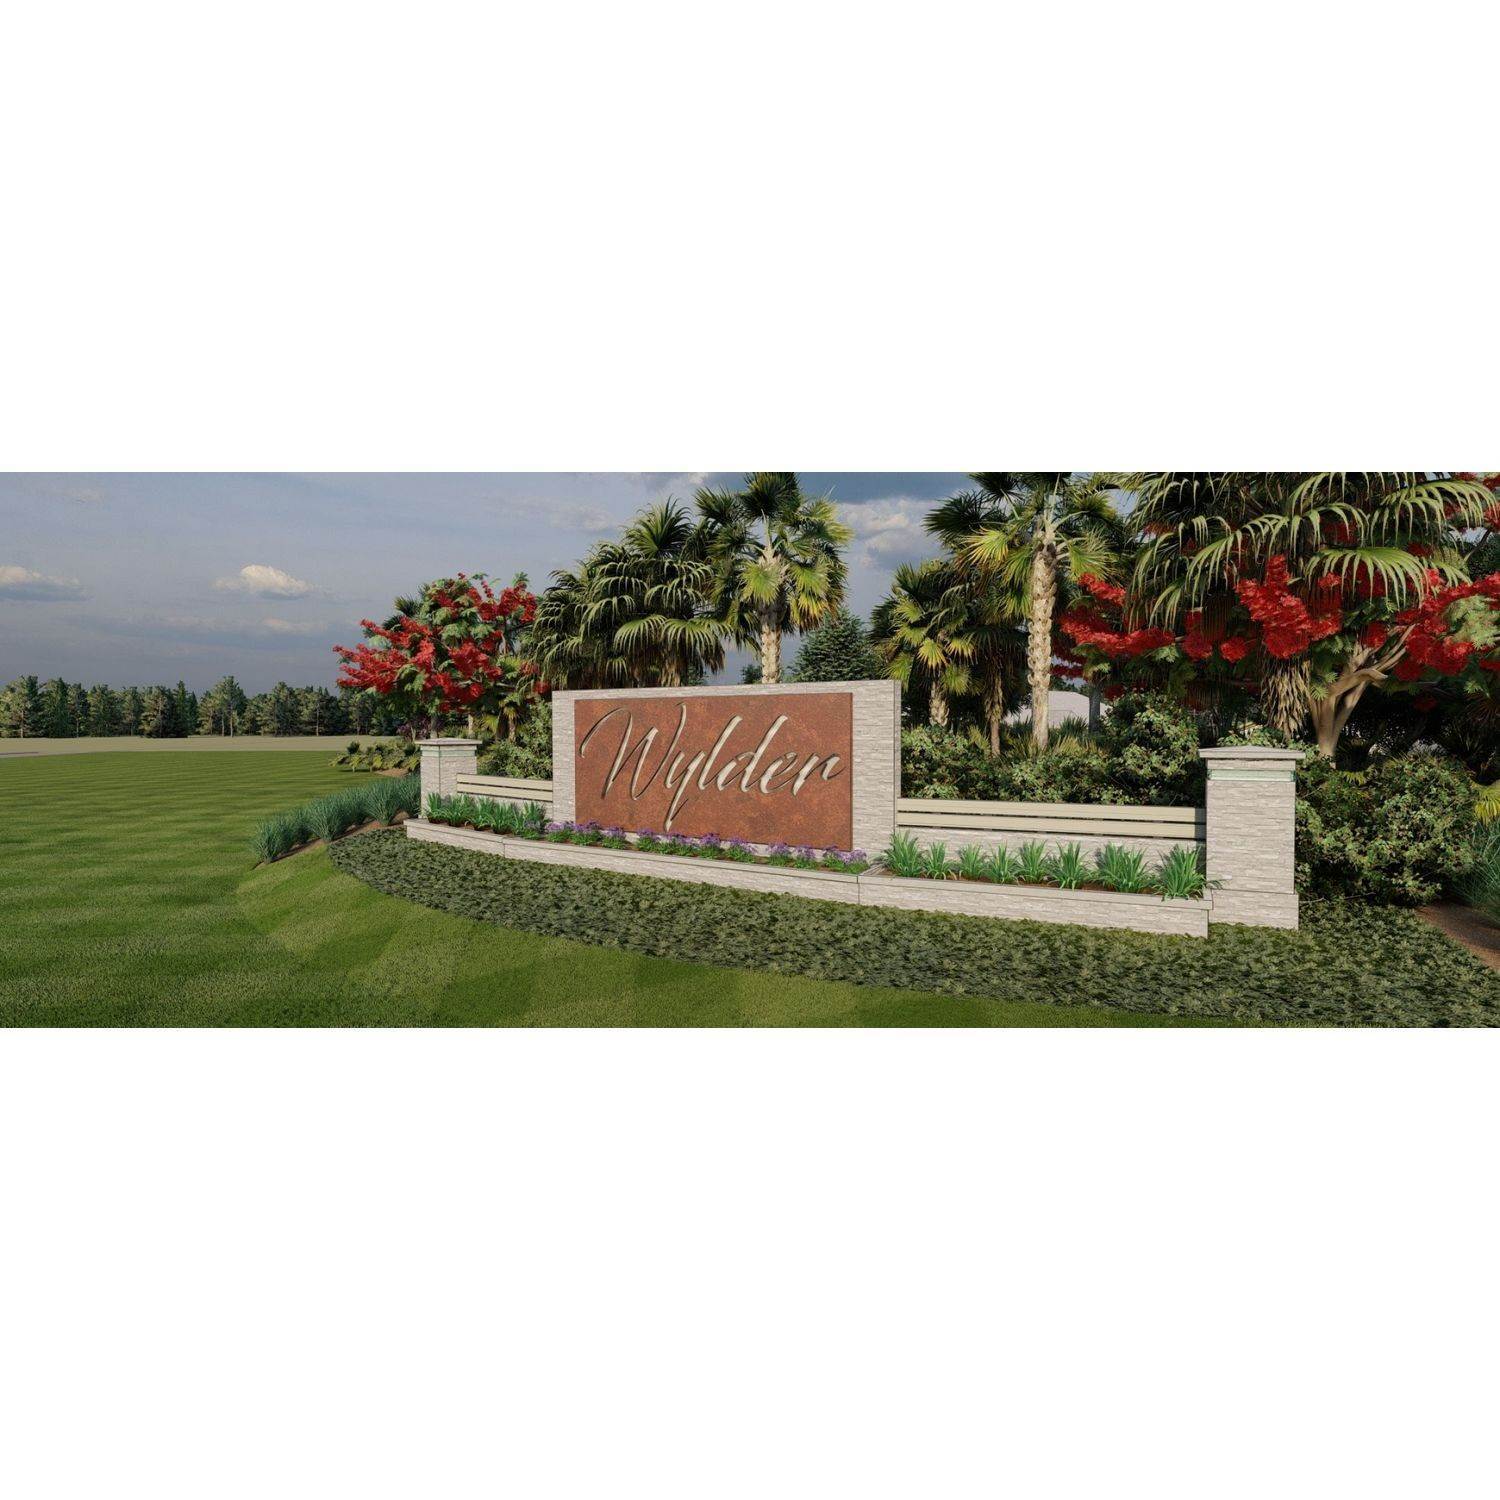 3. Brystol at Wylder - The Palms Collection xây dựng tại 6205 Sweetwood Drive, Port St. Lucie, FL 34987